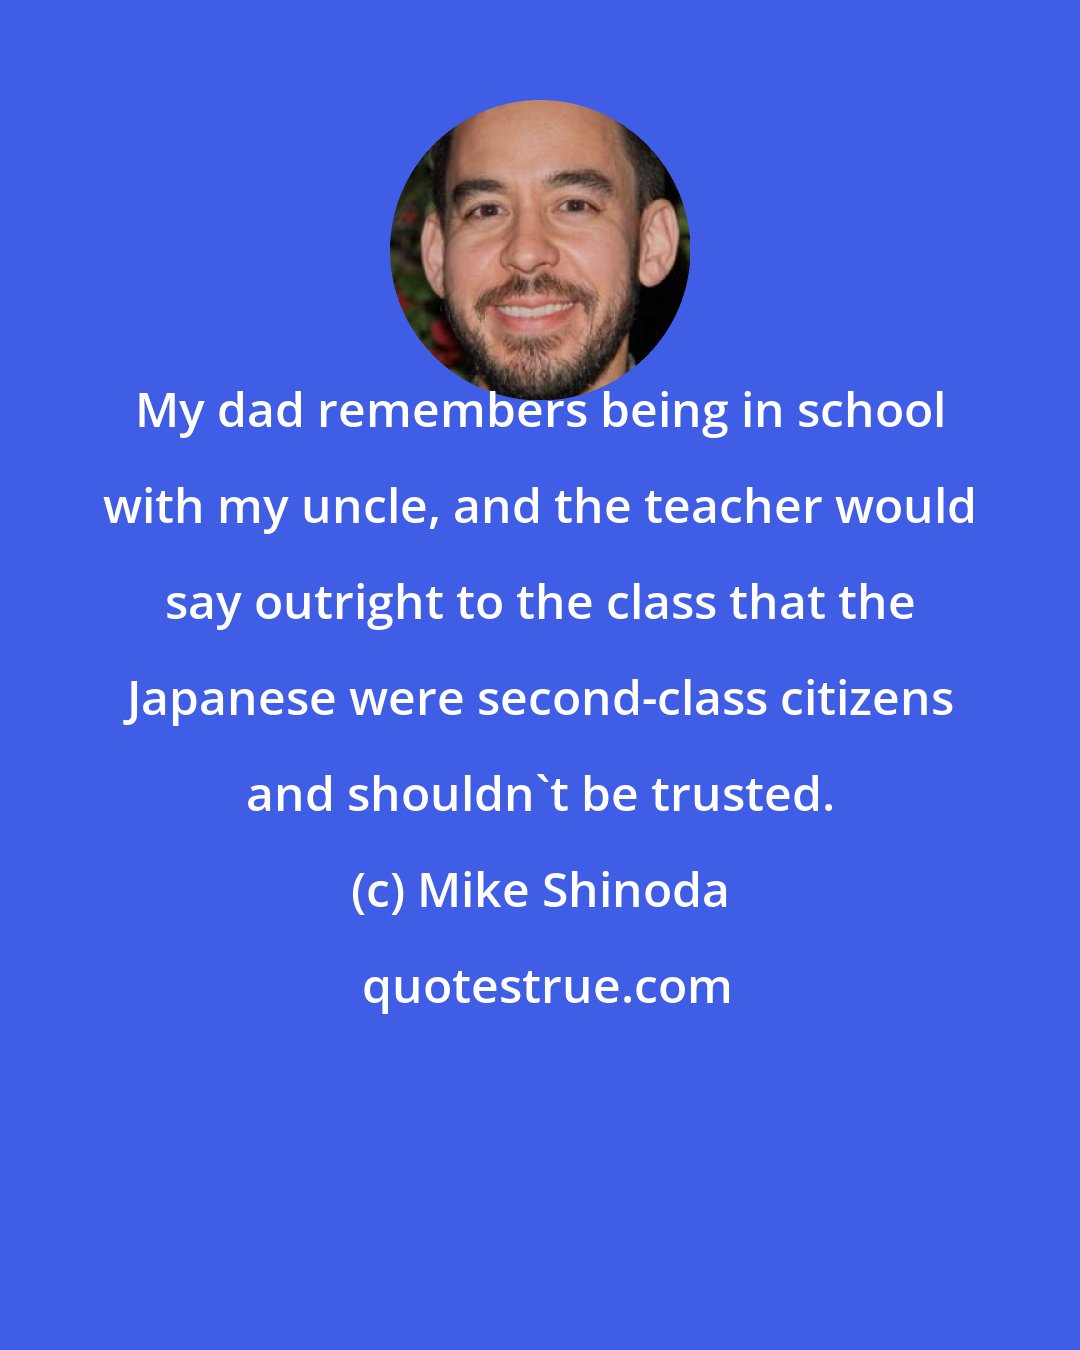 Mike Shinoda: My dad remembers being in school with my uncle, and the teacher would say outright to the class that the Japanese were second-class citizens and shouldn't be trusted.